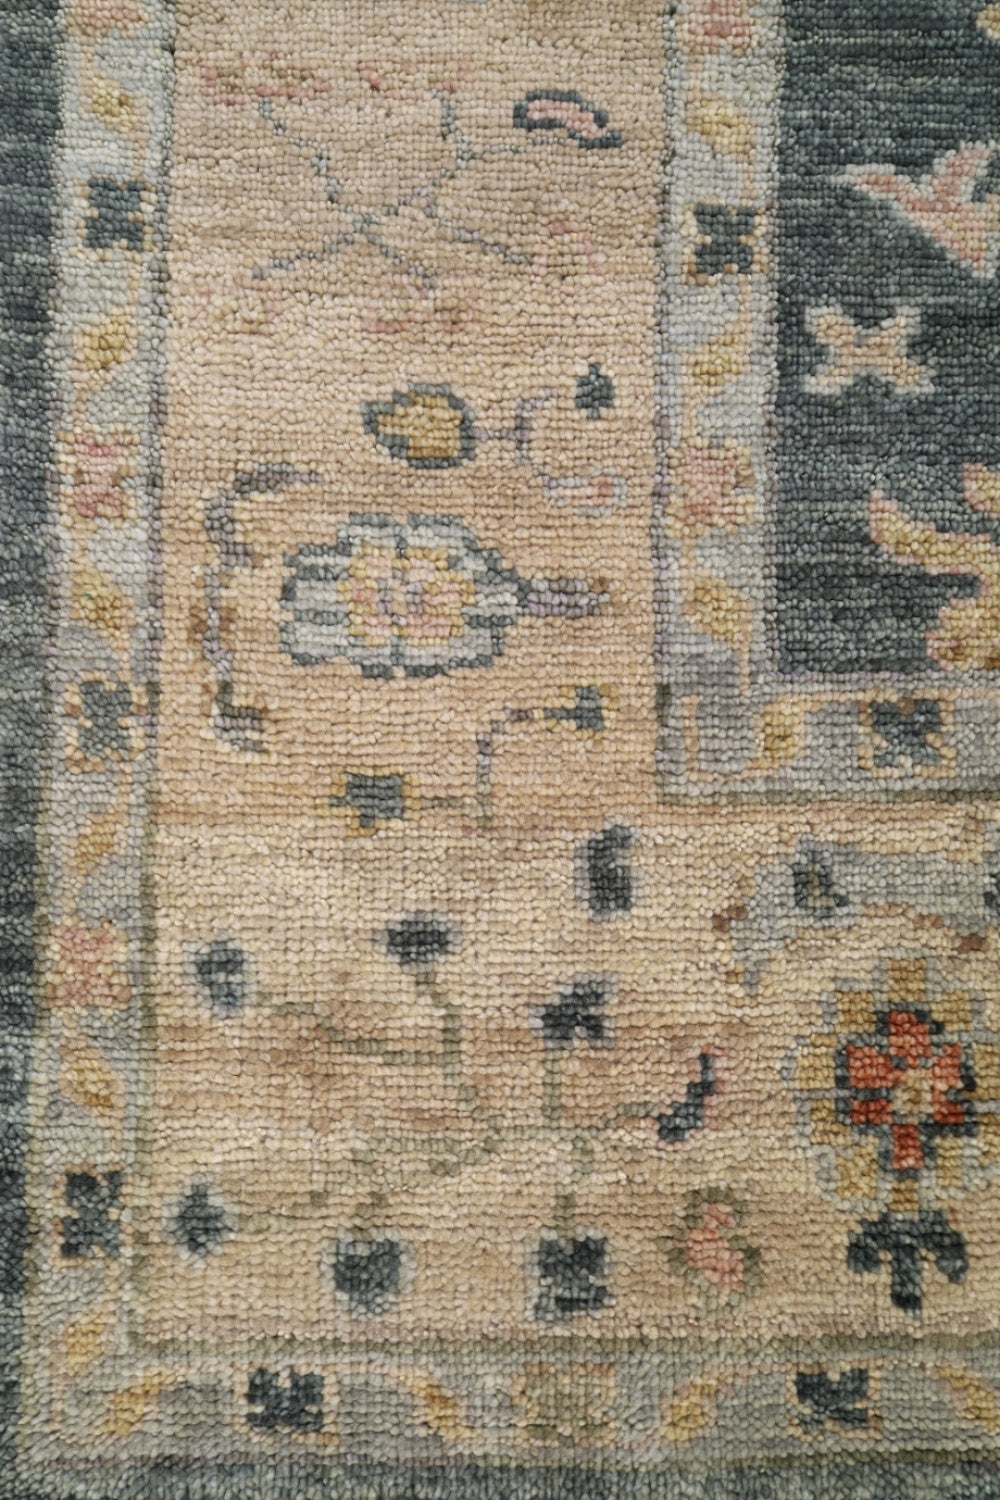 Sultanabad 1 Handwoven Traditional Rug, J72599